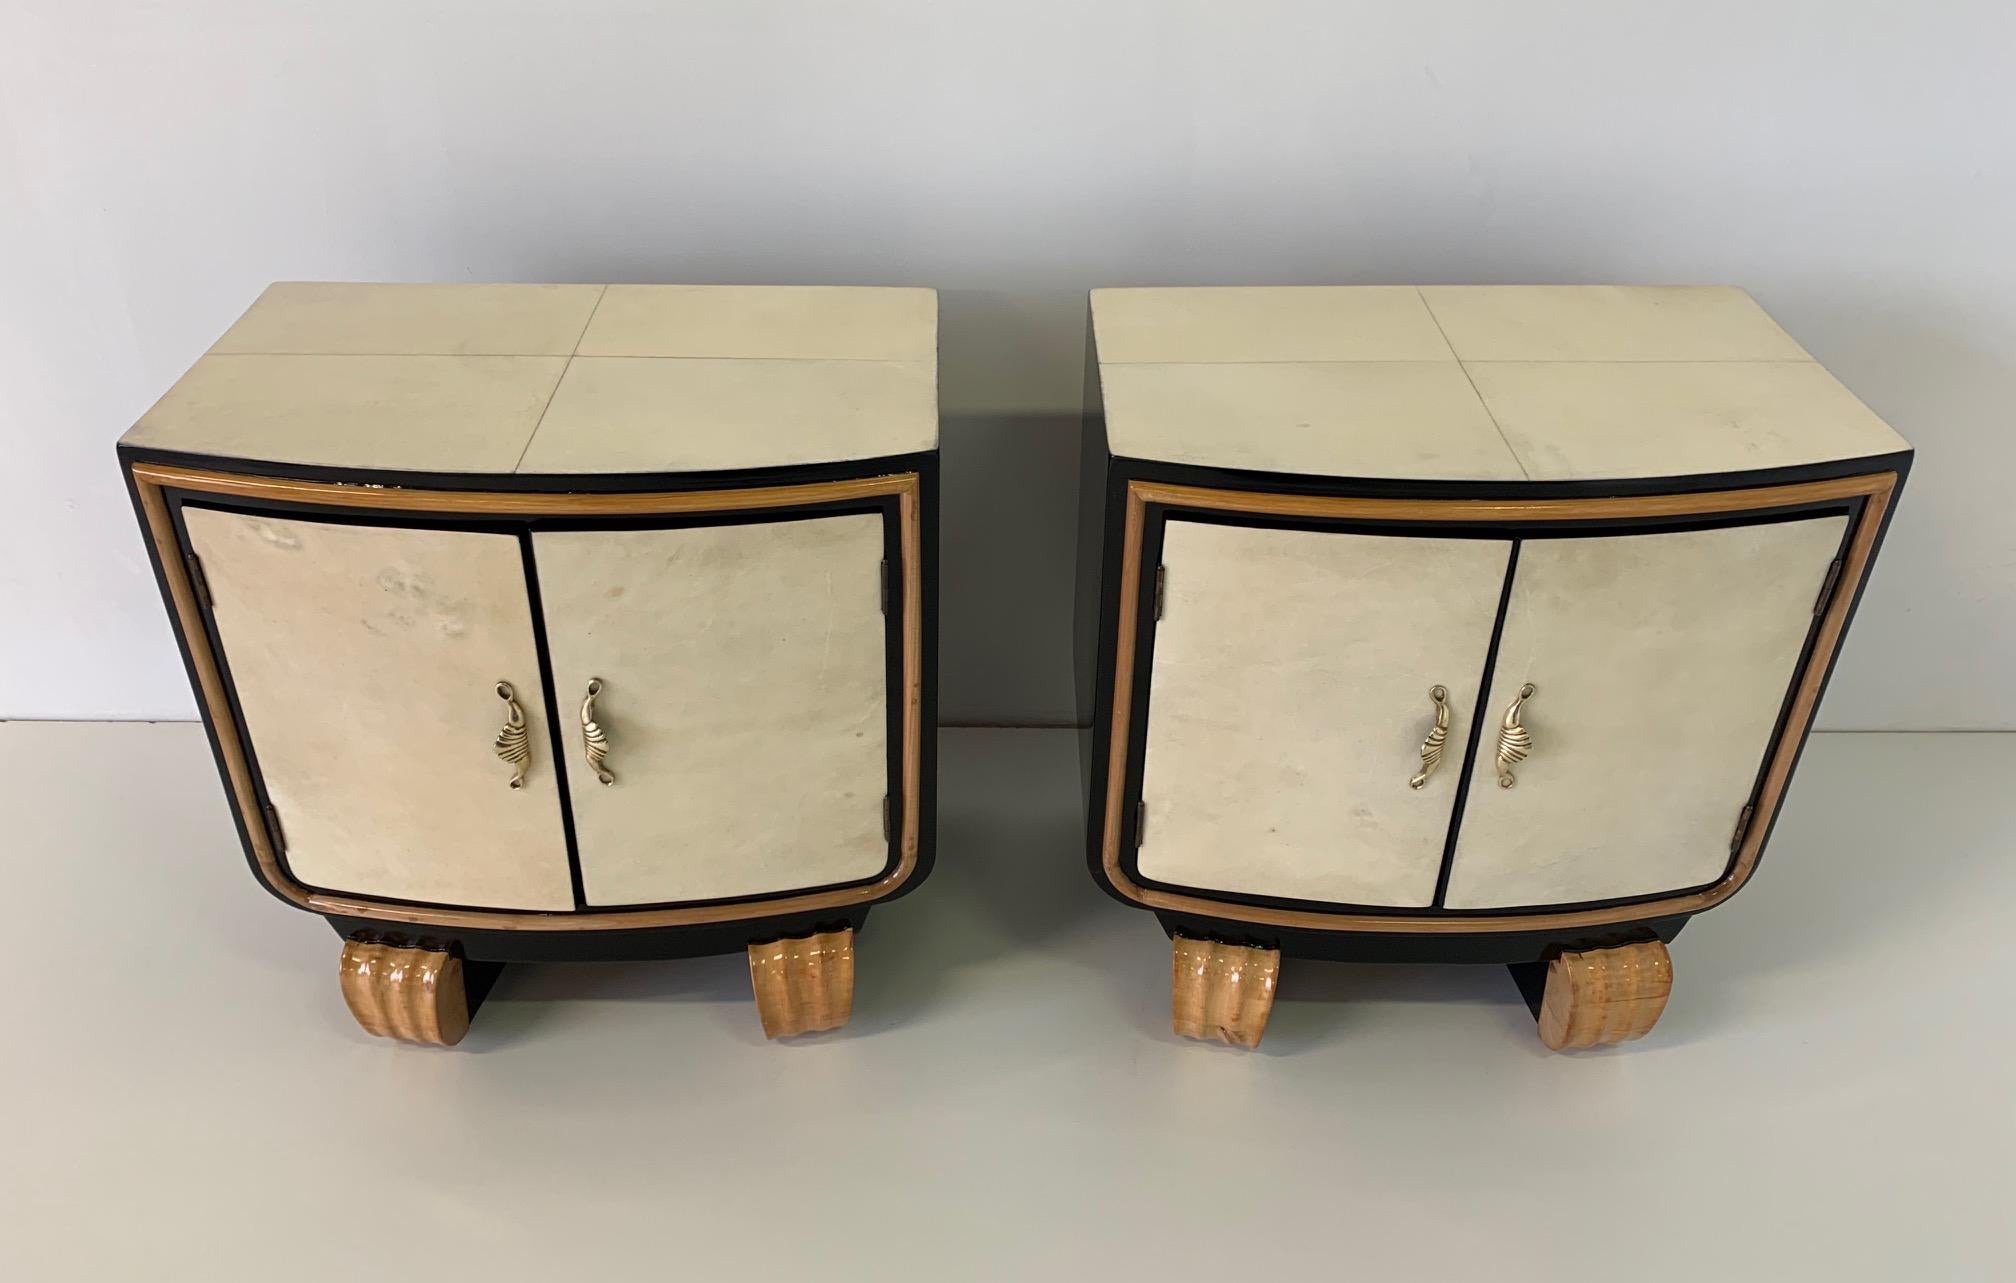 These Art Deco bedside tables were produced in the 1940s in Italy.
The front and the top are covered with parchment while the base and the sides are black lacquered.
Details are in maple and handles are in brass.
Completely restored.